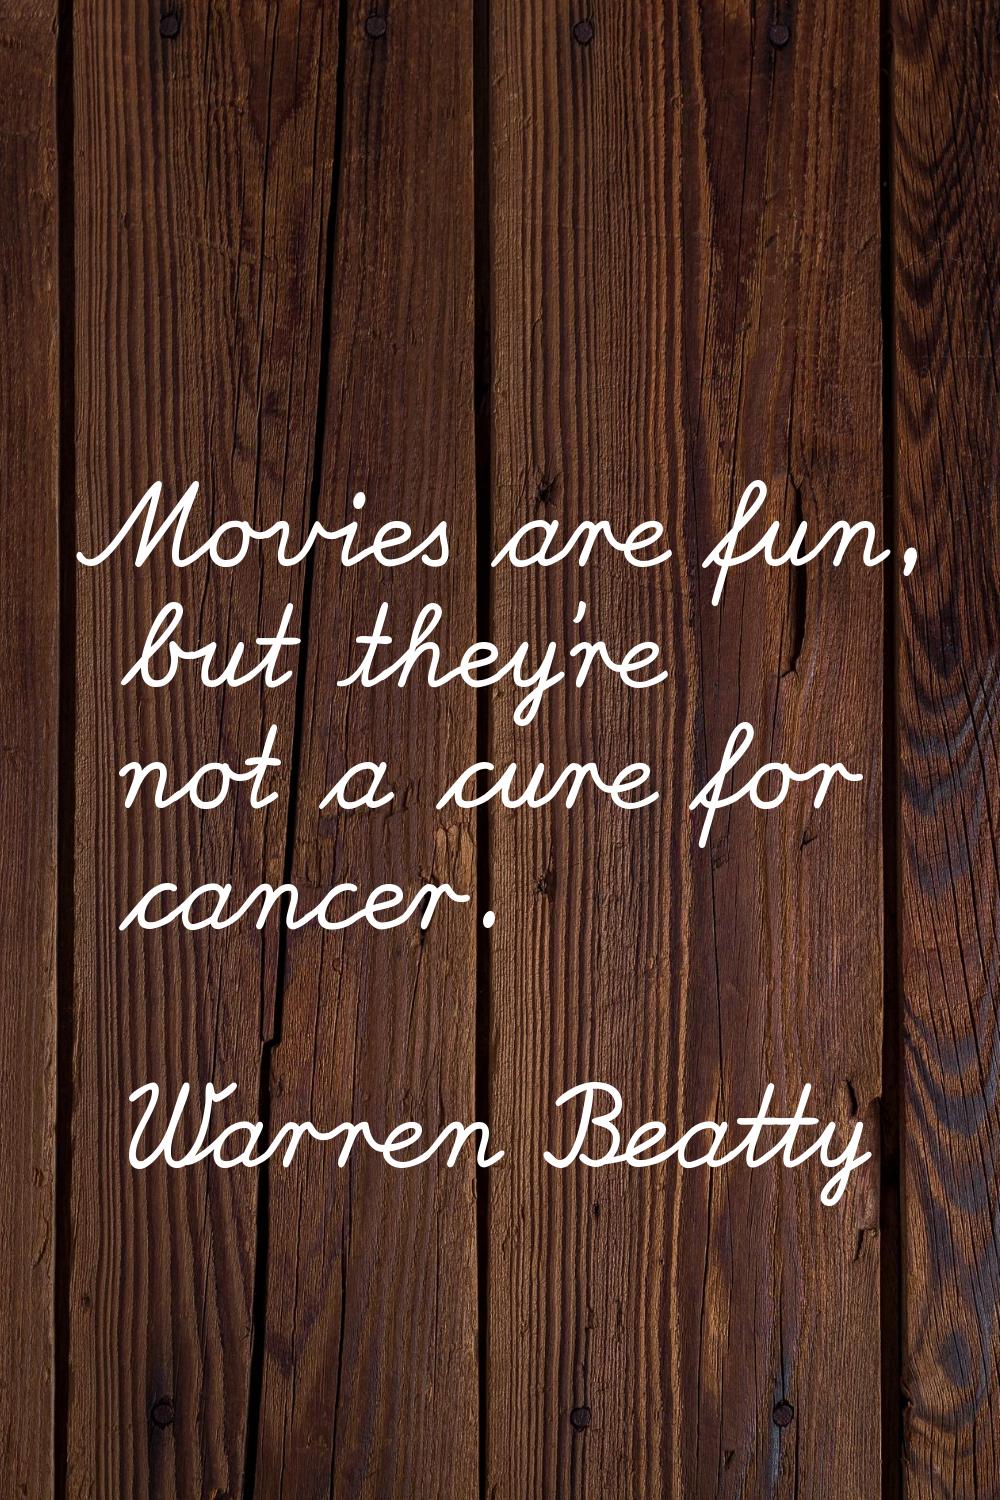 Movies are fun, but they're not a cure for cancer.